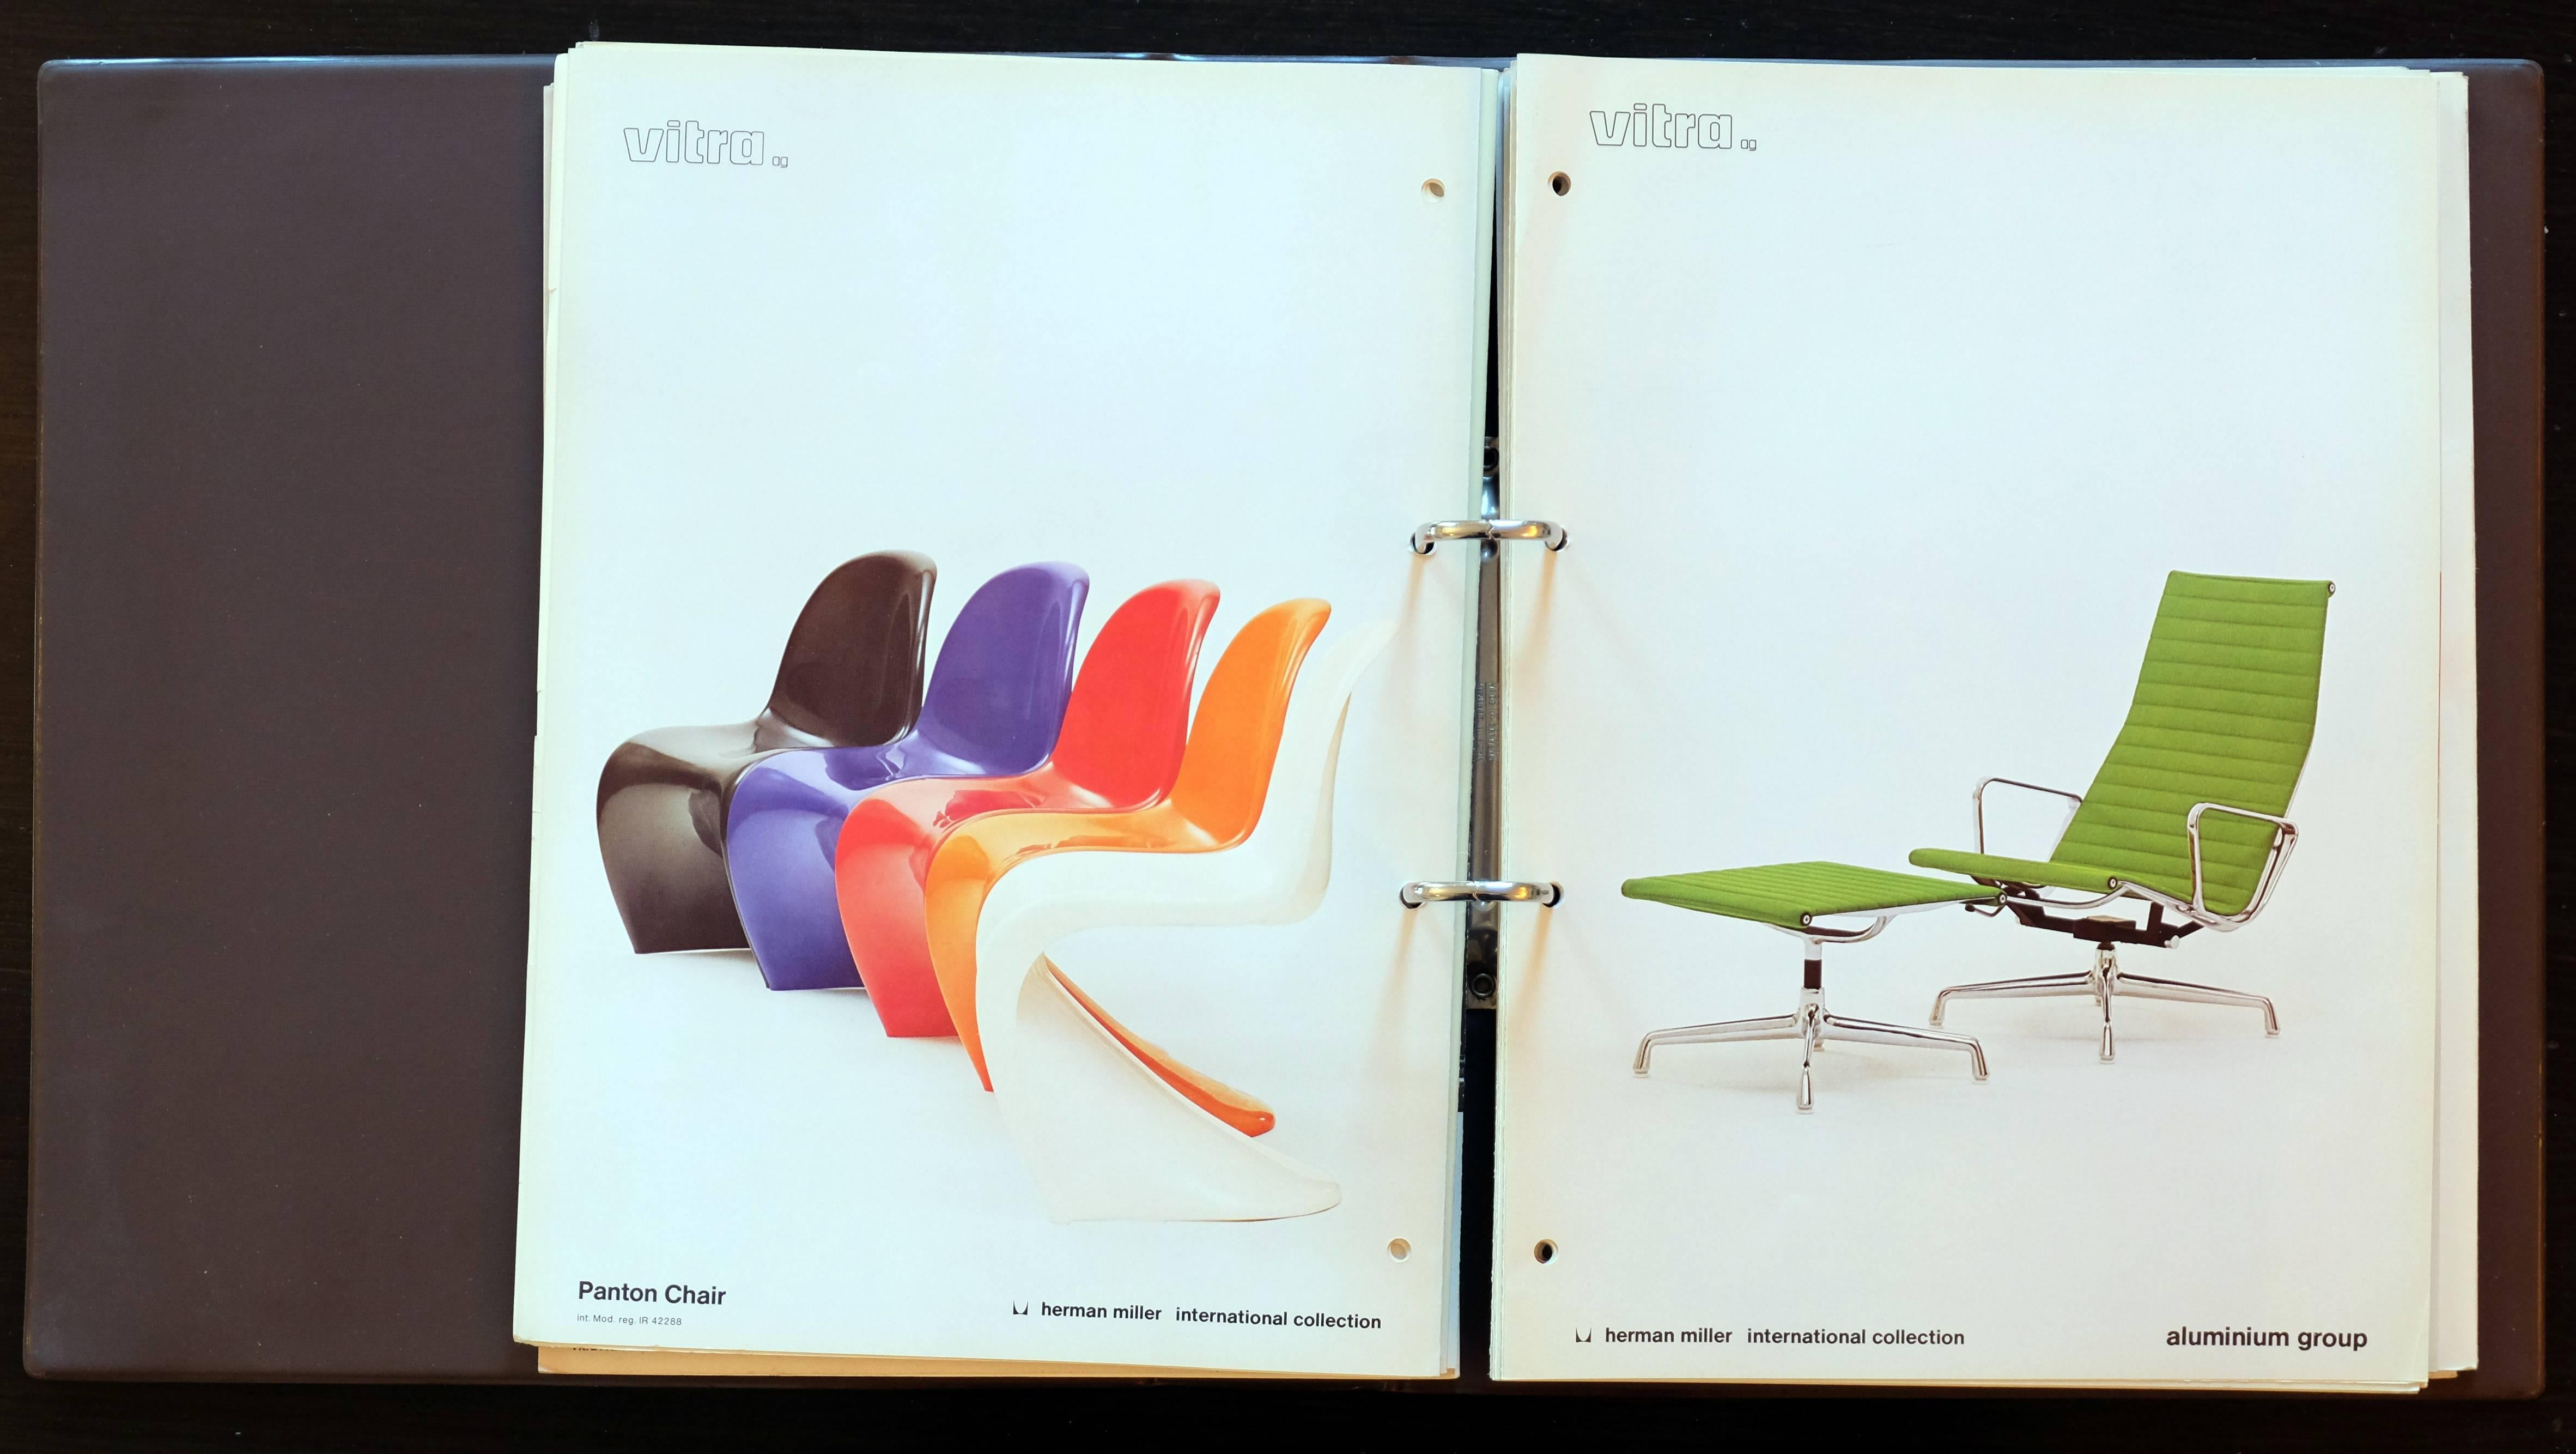 Paper Herman Miller International Collection and Vitra, 1978 Dealer's Catalogue